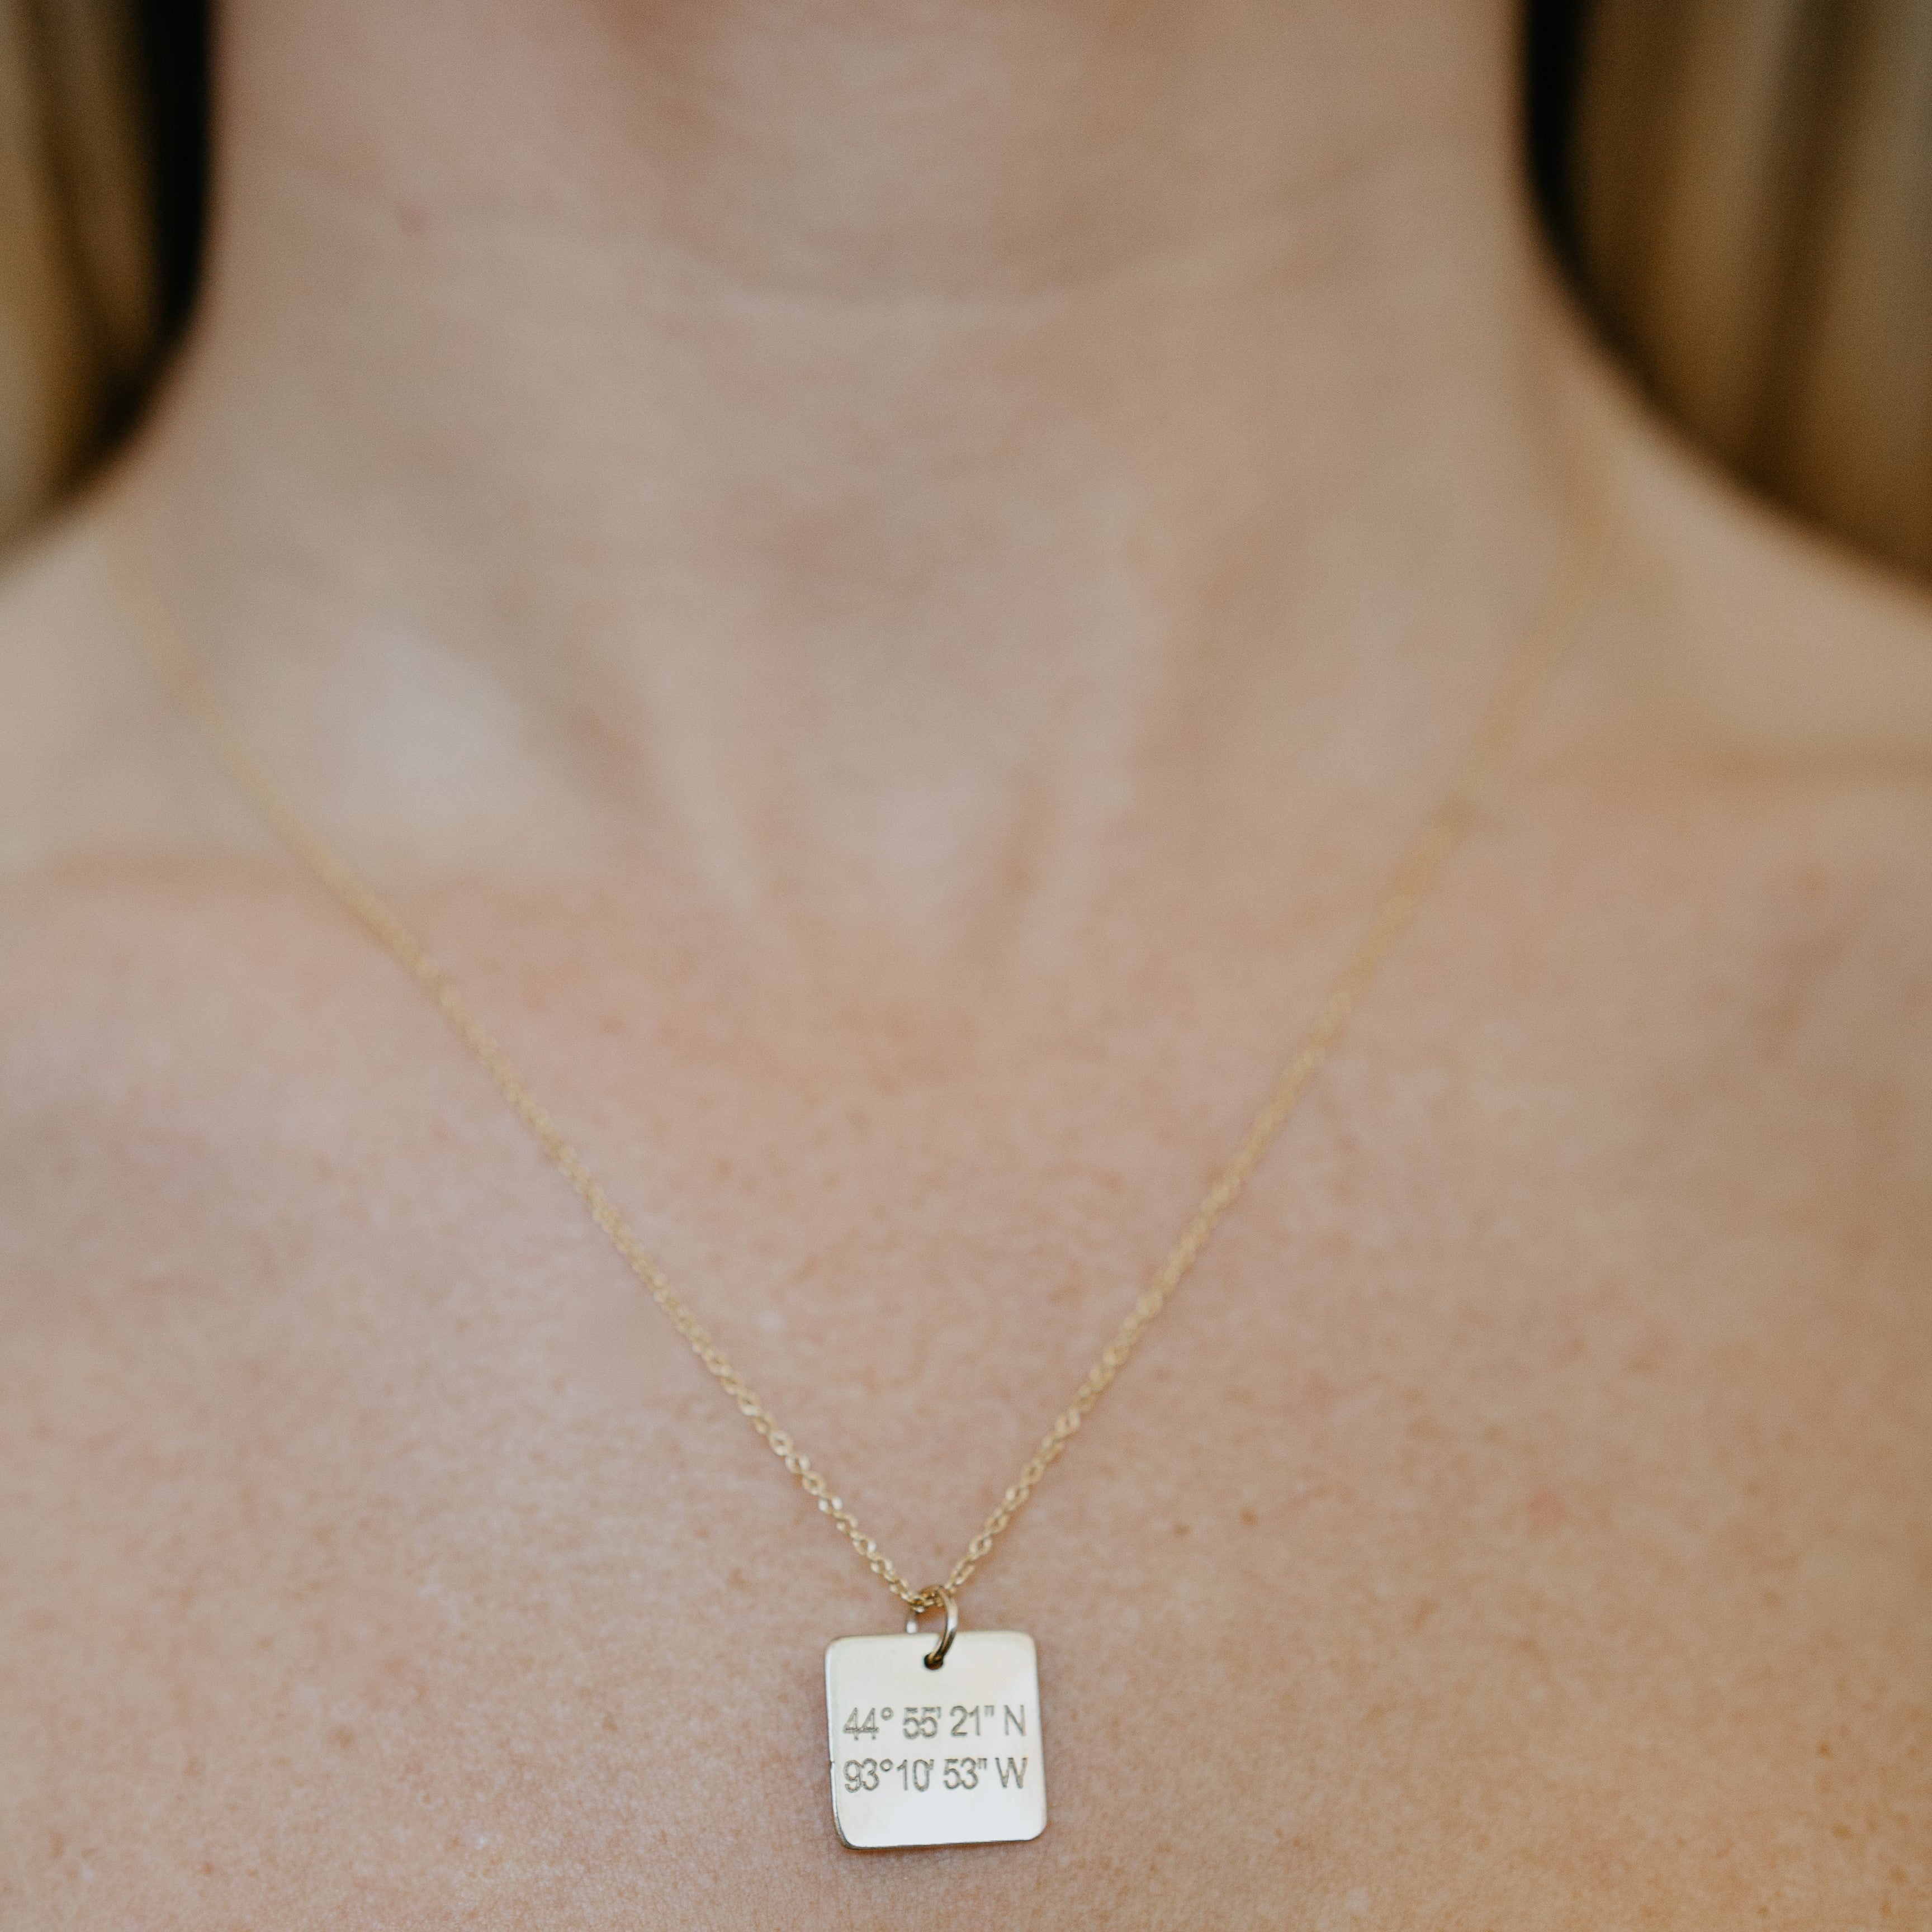 Lat & Lo Casco necklace, on figure, square charm on cable chain, engraved with coordinates, 14K gold filled